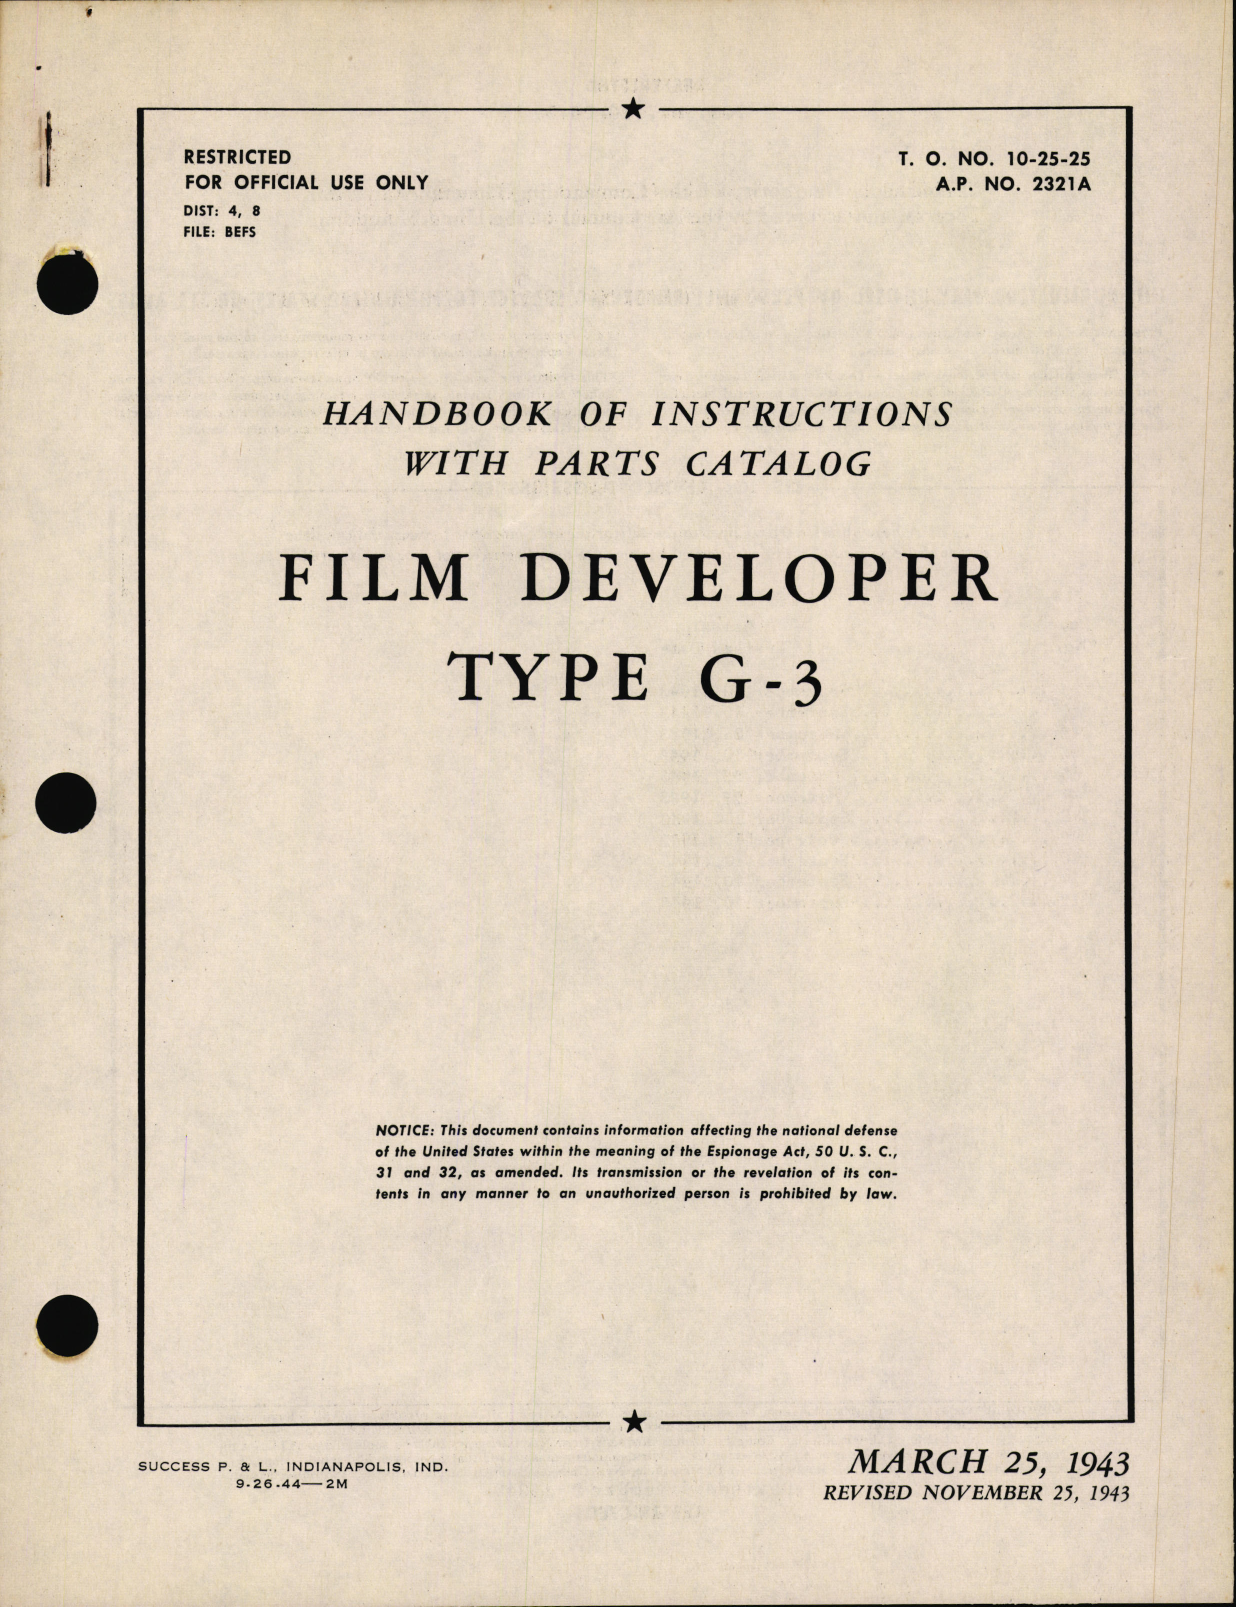 Sample page 7 from AirCorps Library document: Handbook of Instructions with Parts Catalog for Type G-3 Film Developer